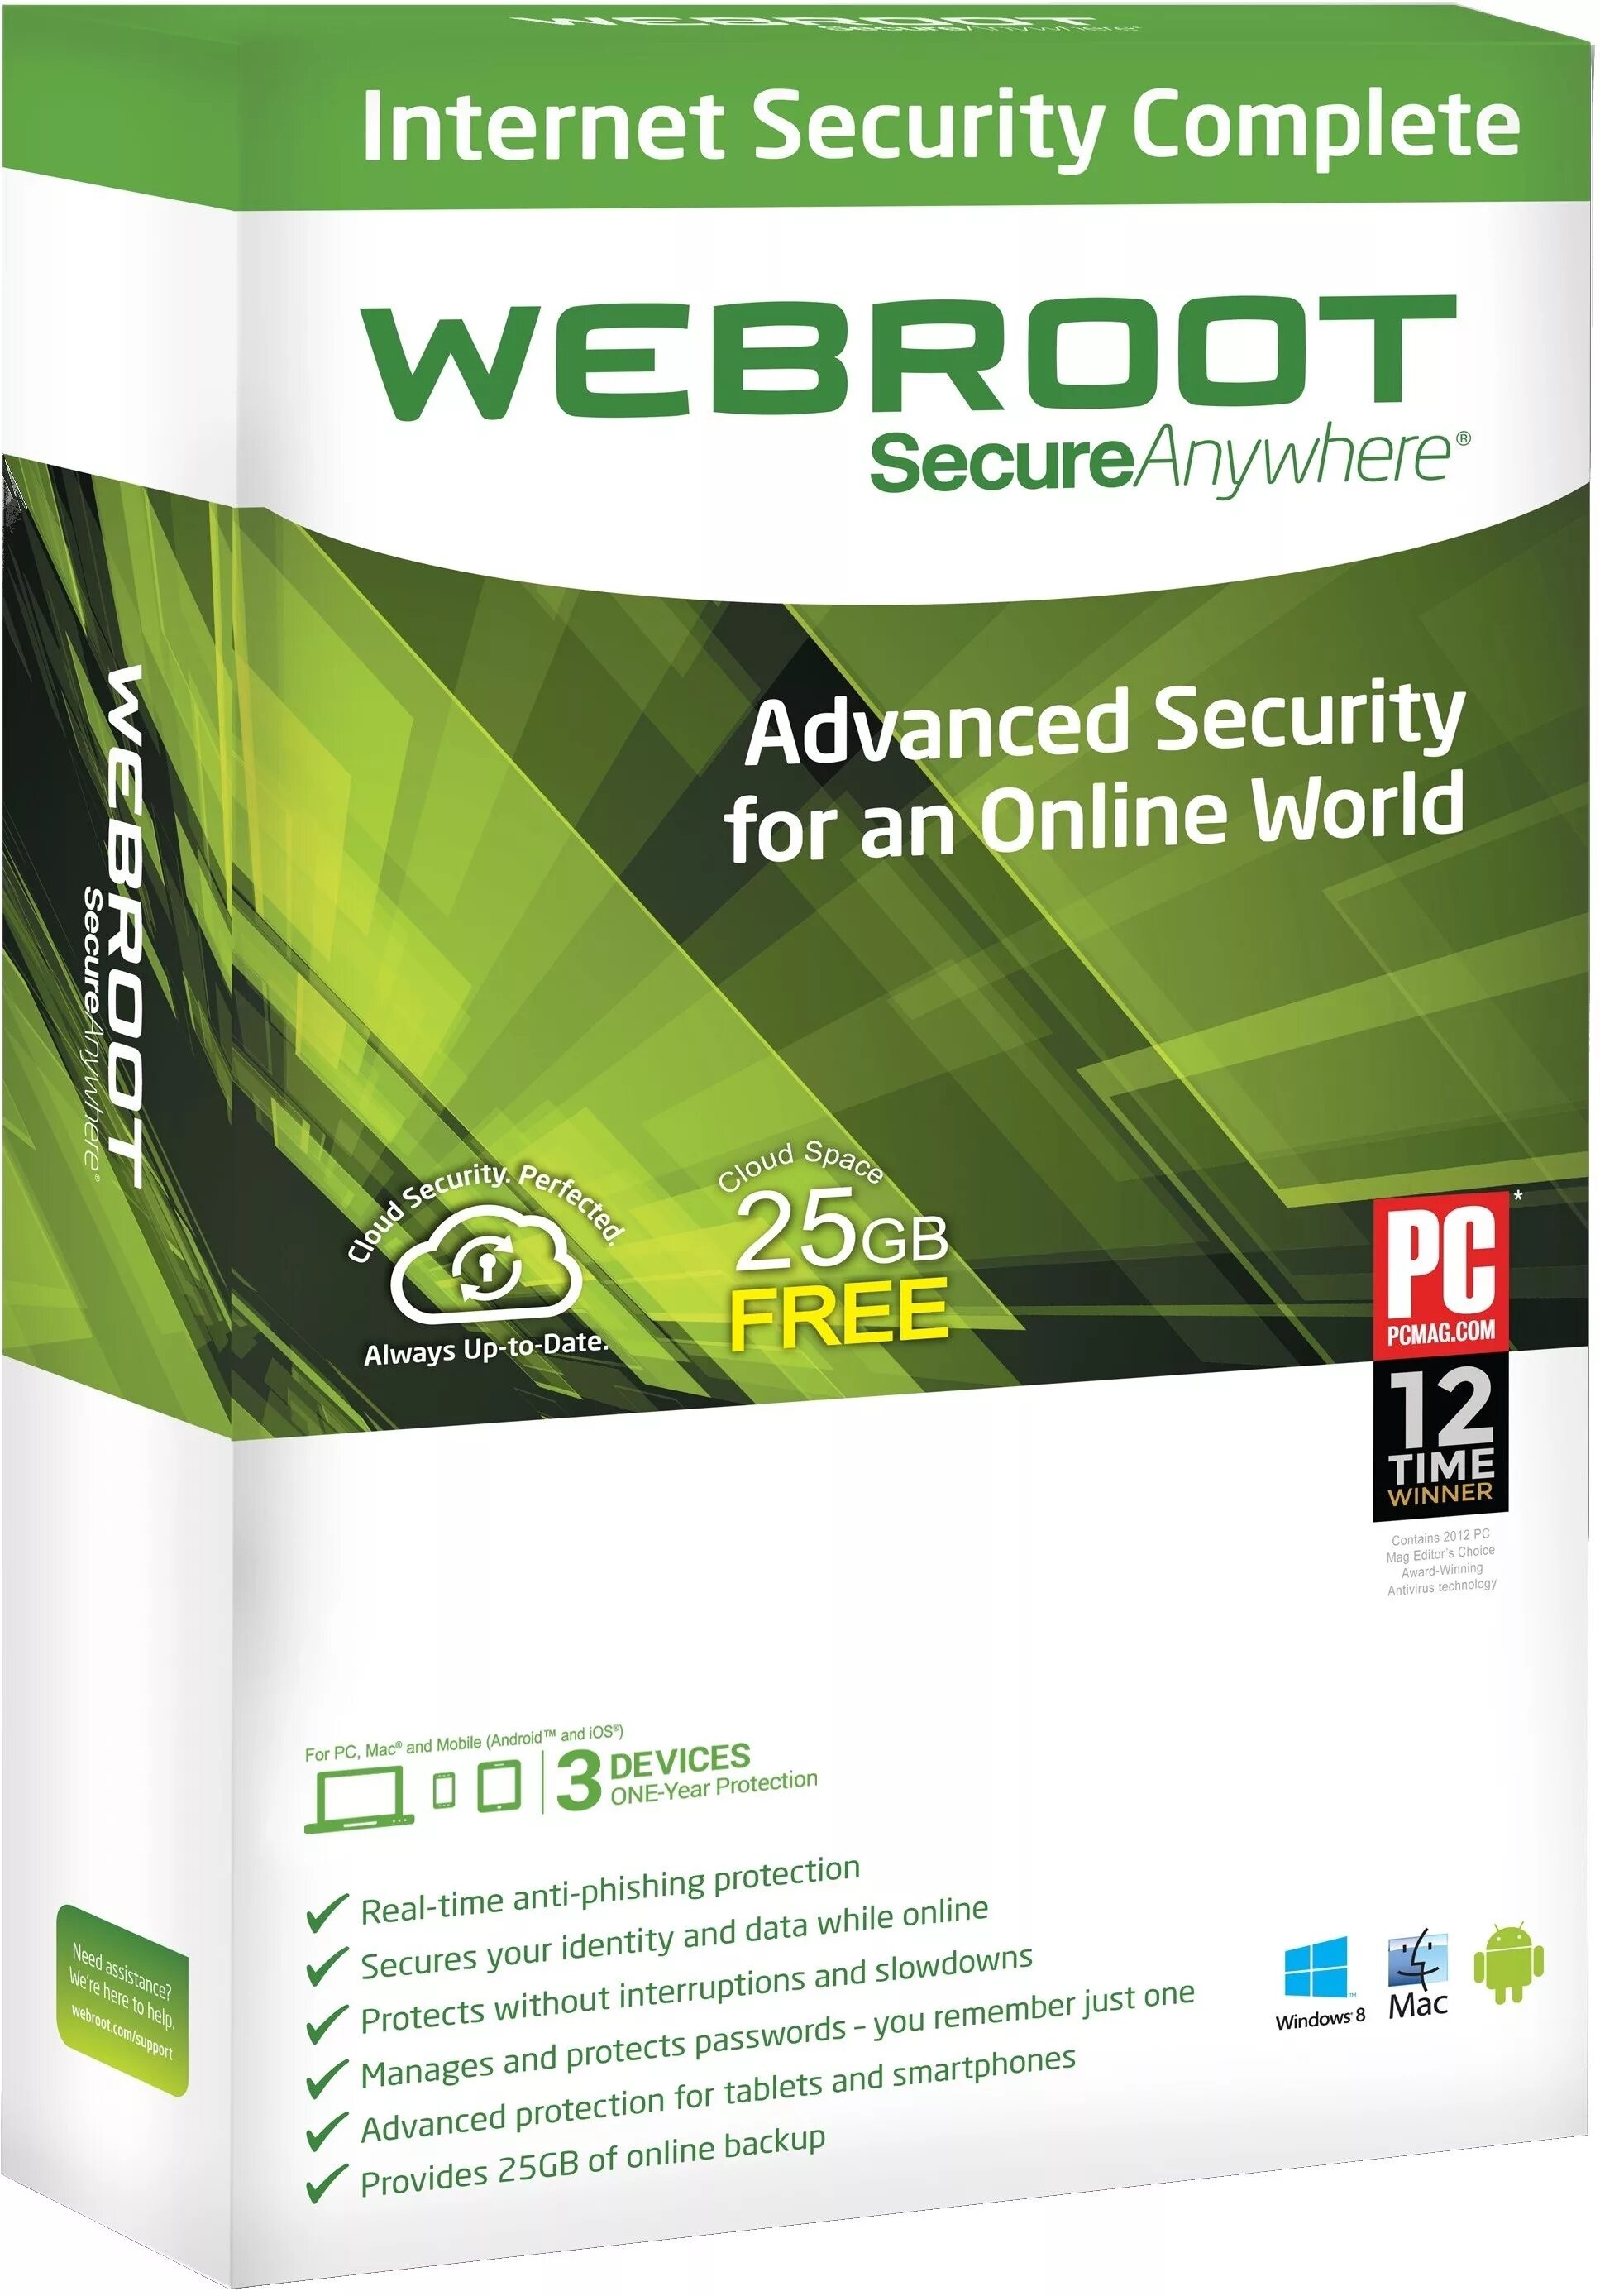 Internet security is. Webroot Internet Security complete. Антивирус webroot SECUREANYWHERE Antivirus. Webroot SECUREANYWHERE Internet Security complete. What is Internet Security?.